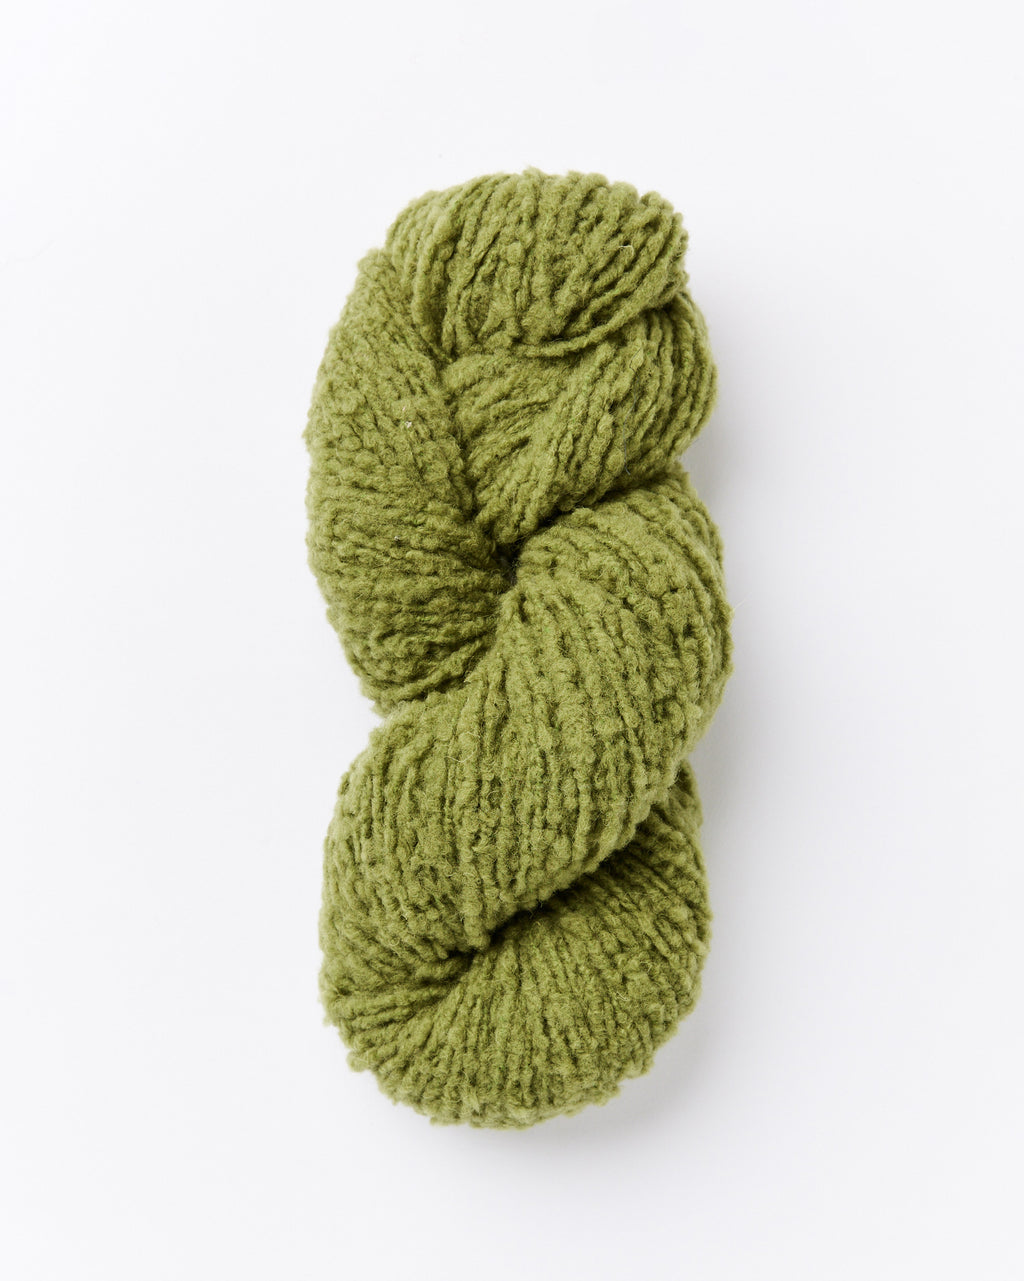 Knit Collage Serenity Boucle Yarn Fatigue Green